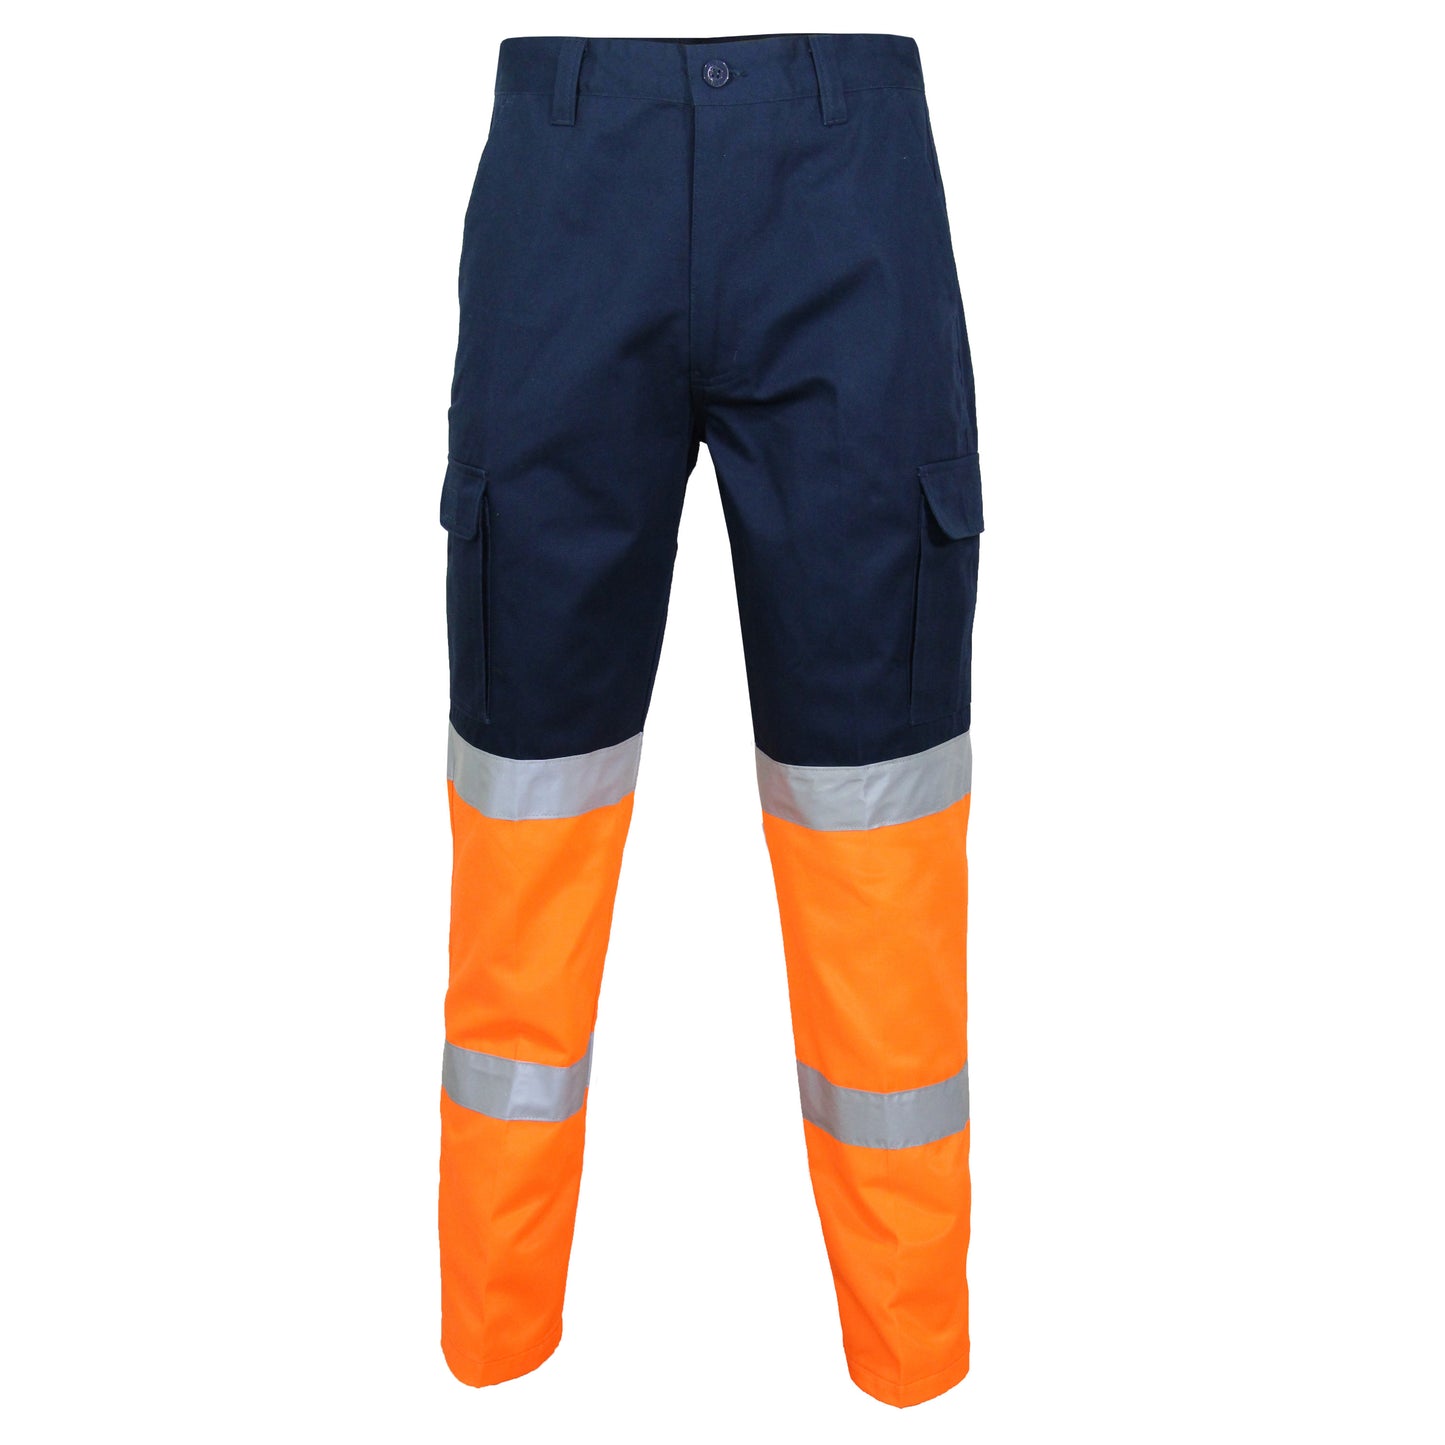 DNC Workwear 2TONE BIOMOTION TAPED CARGO PANTS Product Code: 3363